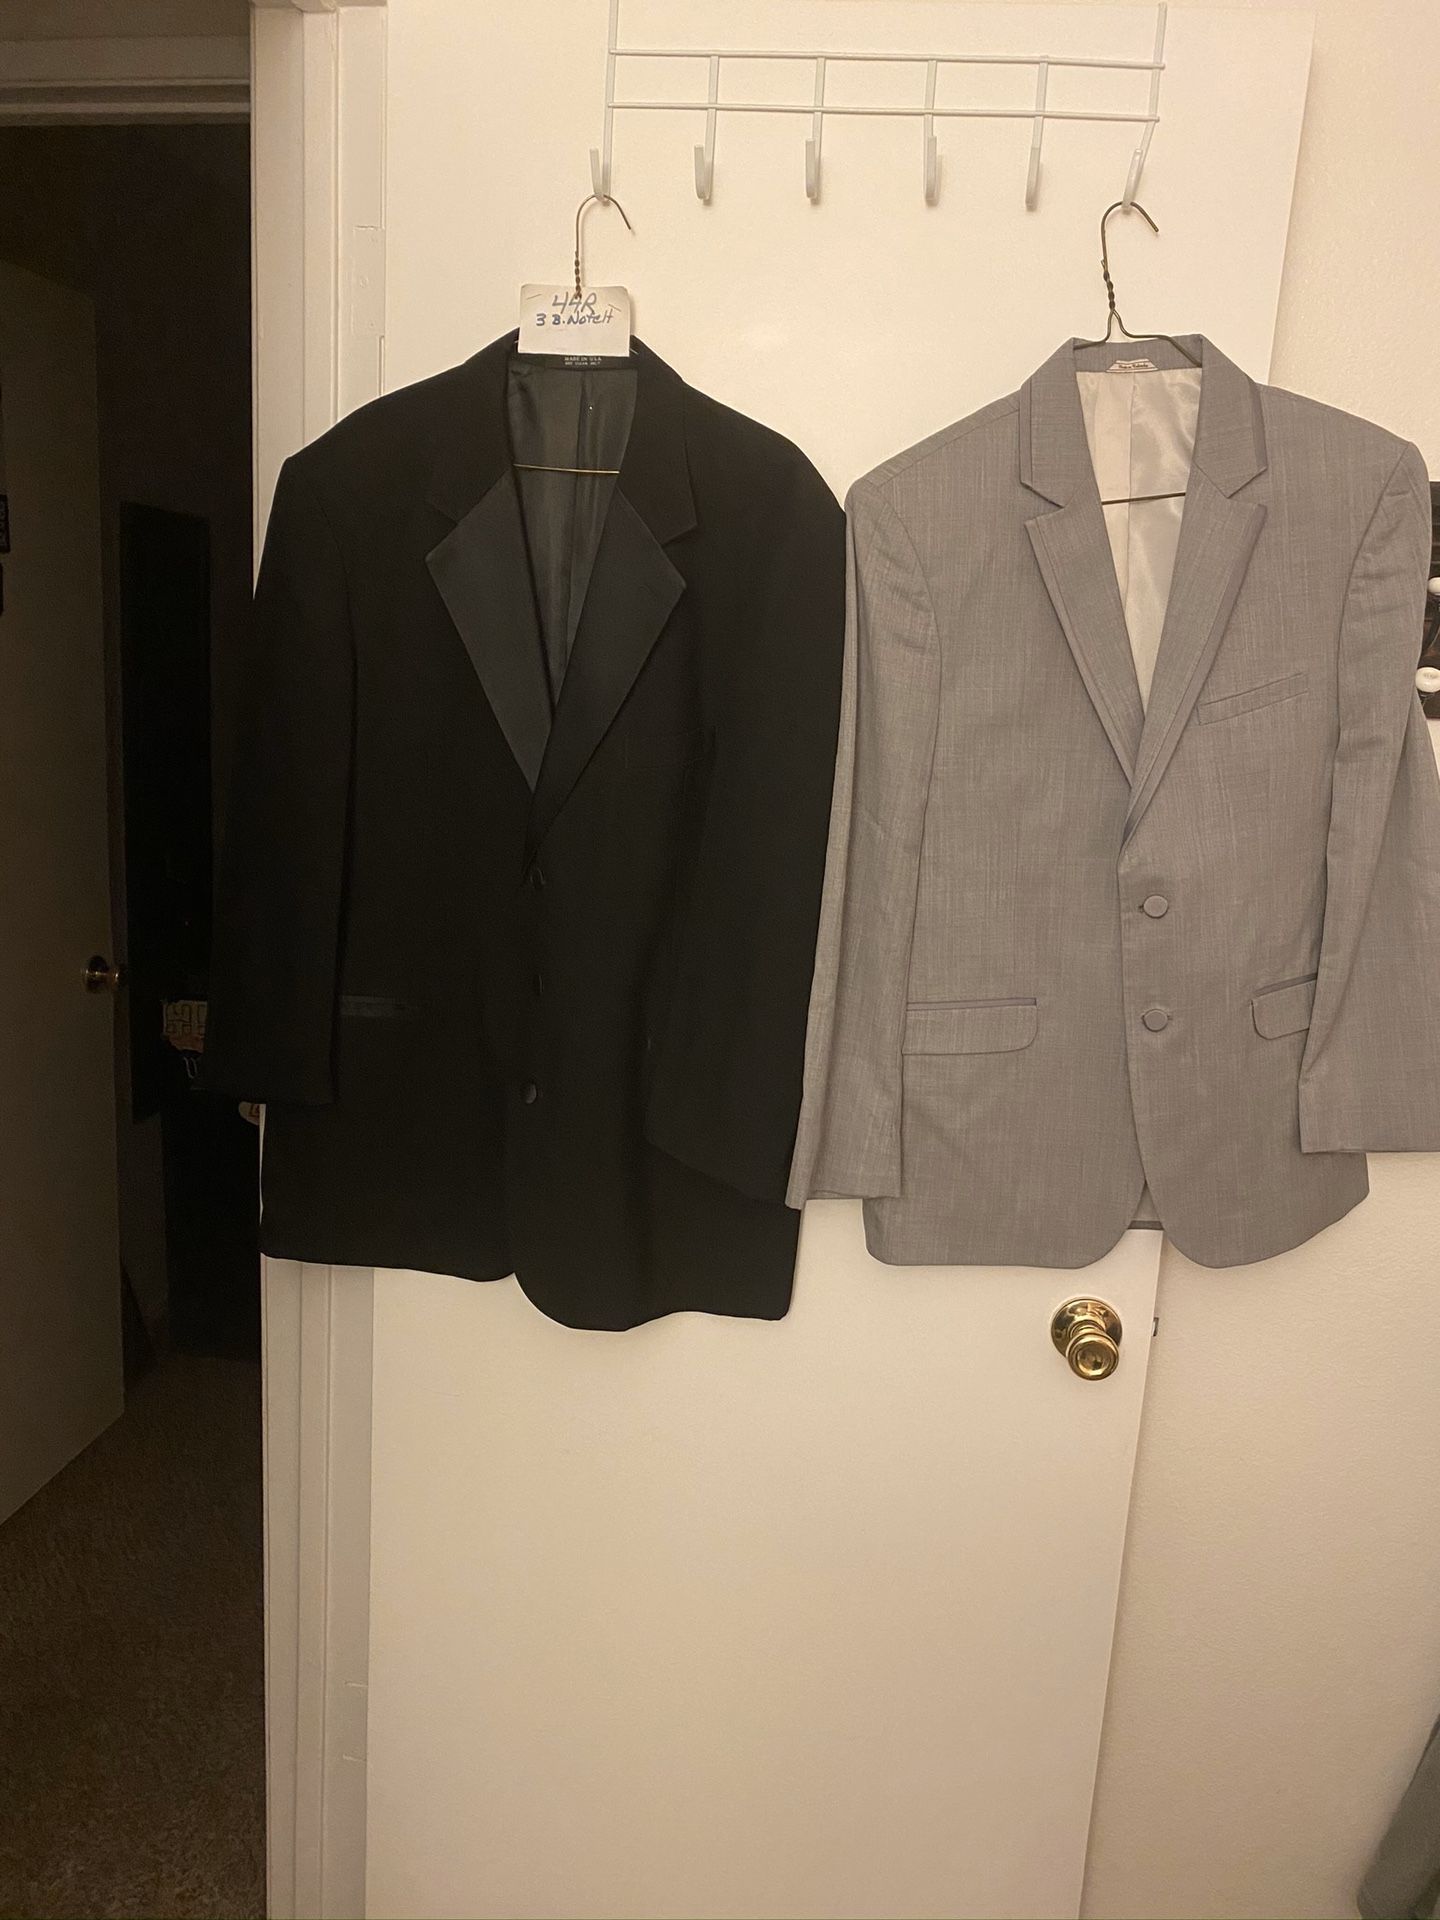 Tuxedos, dresses, suit jackets, vests, soo many sizes and colors